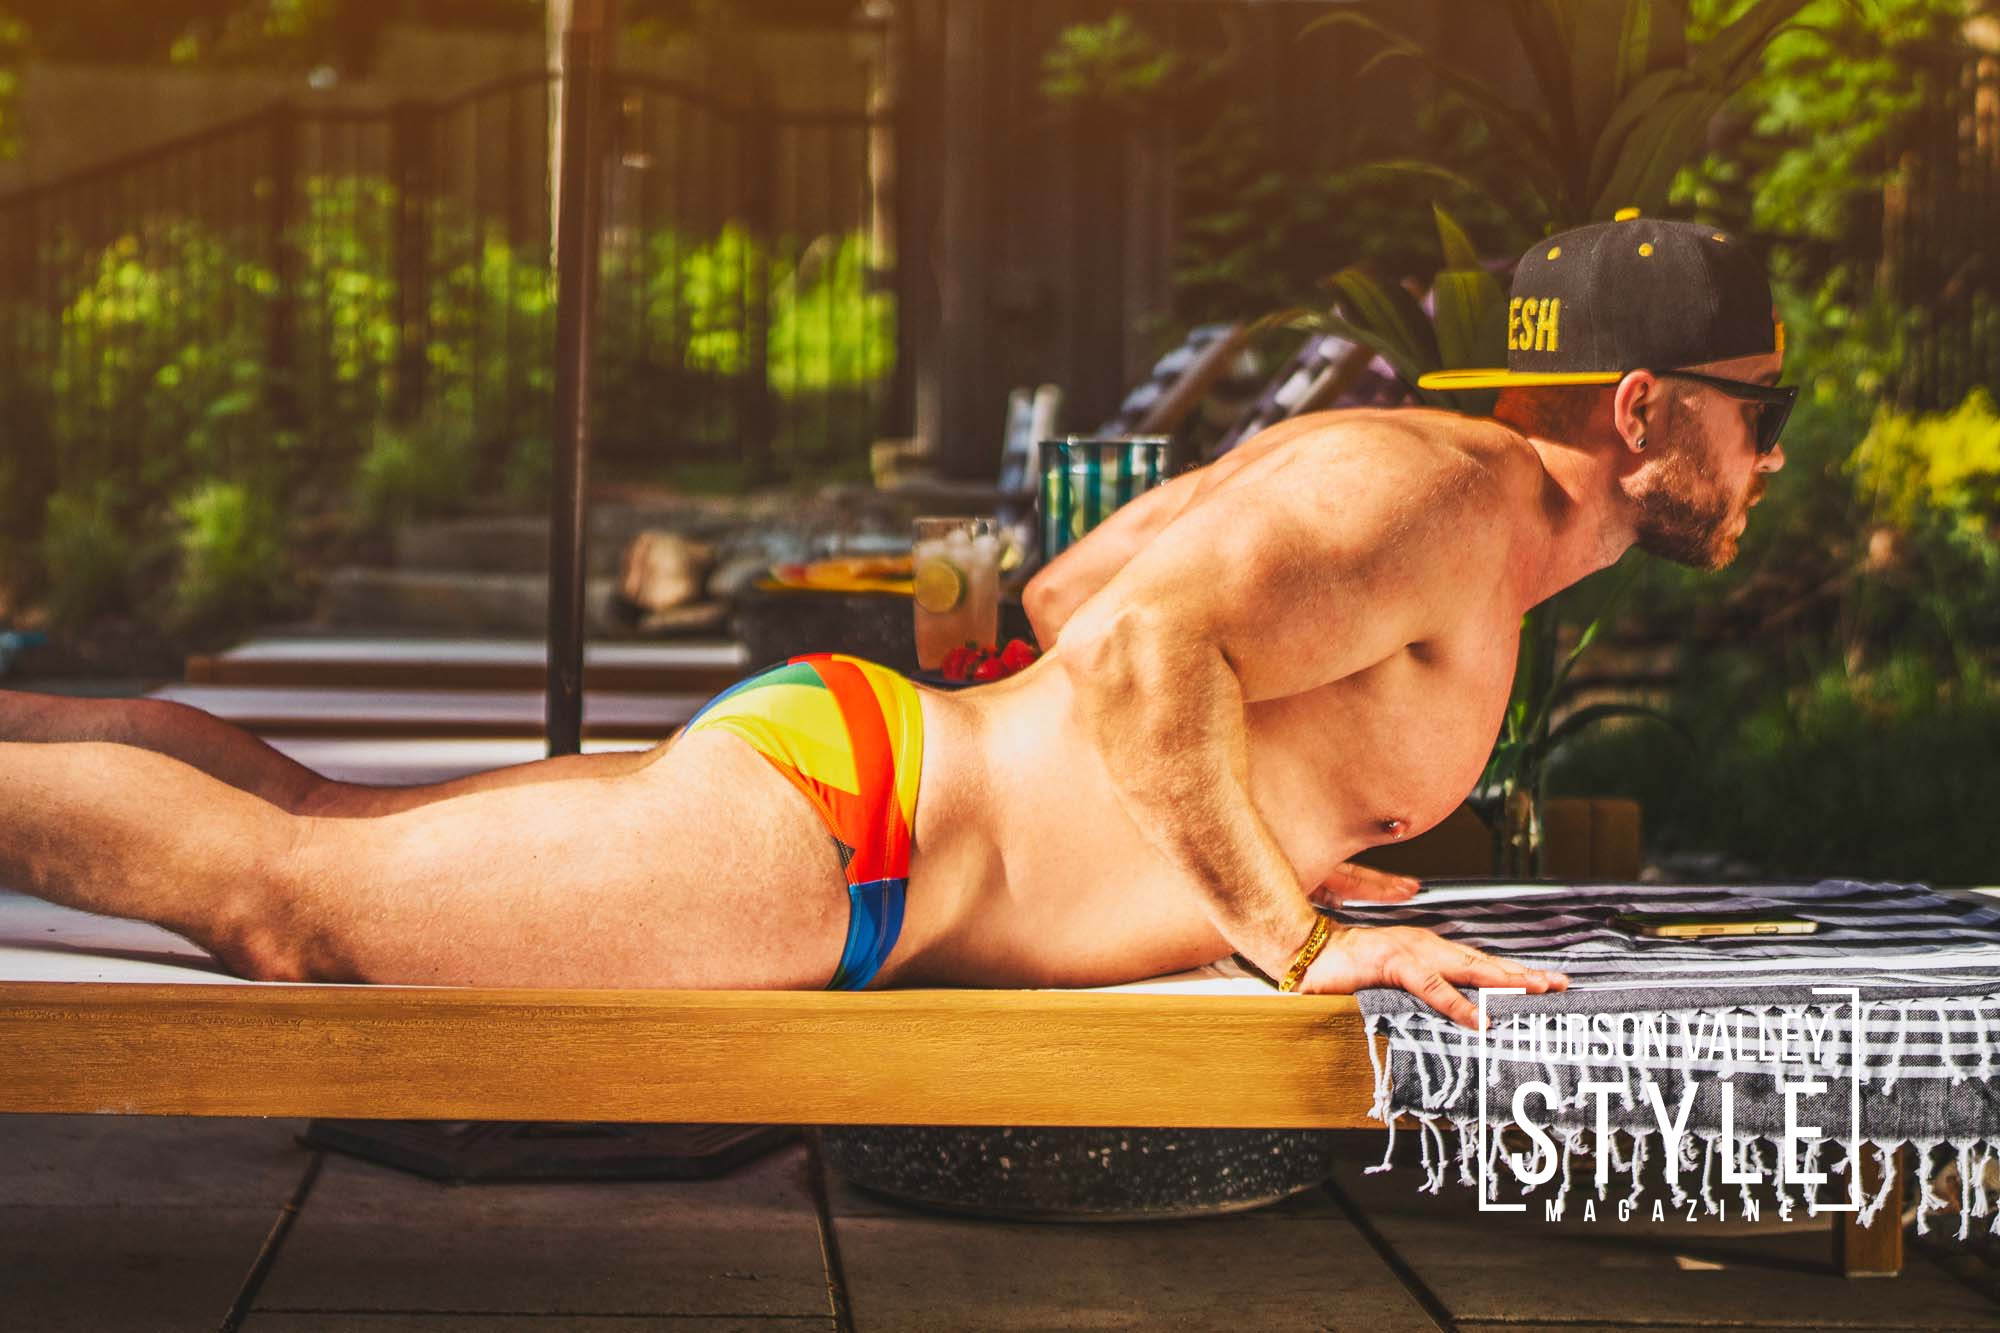 Men’s Swimwear Trends for This Summer: Embrace Your Sexy Side – Gay Men's Style with Maxwell Alexander – Men's Fashion – Pride Month – Presented by Duncan Avenue Studios